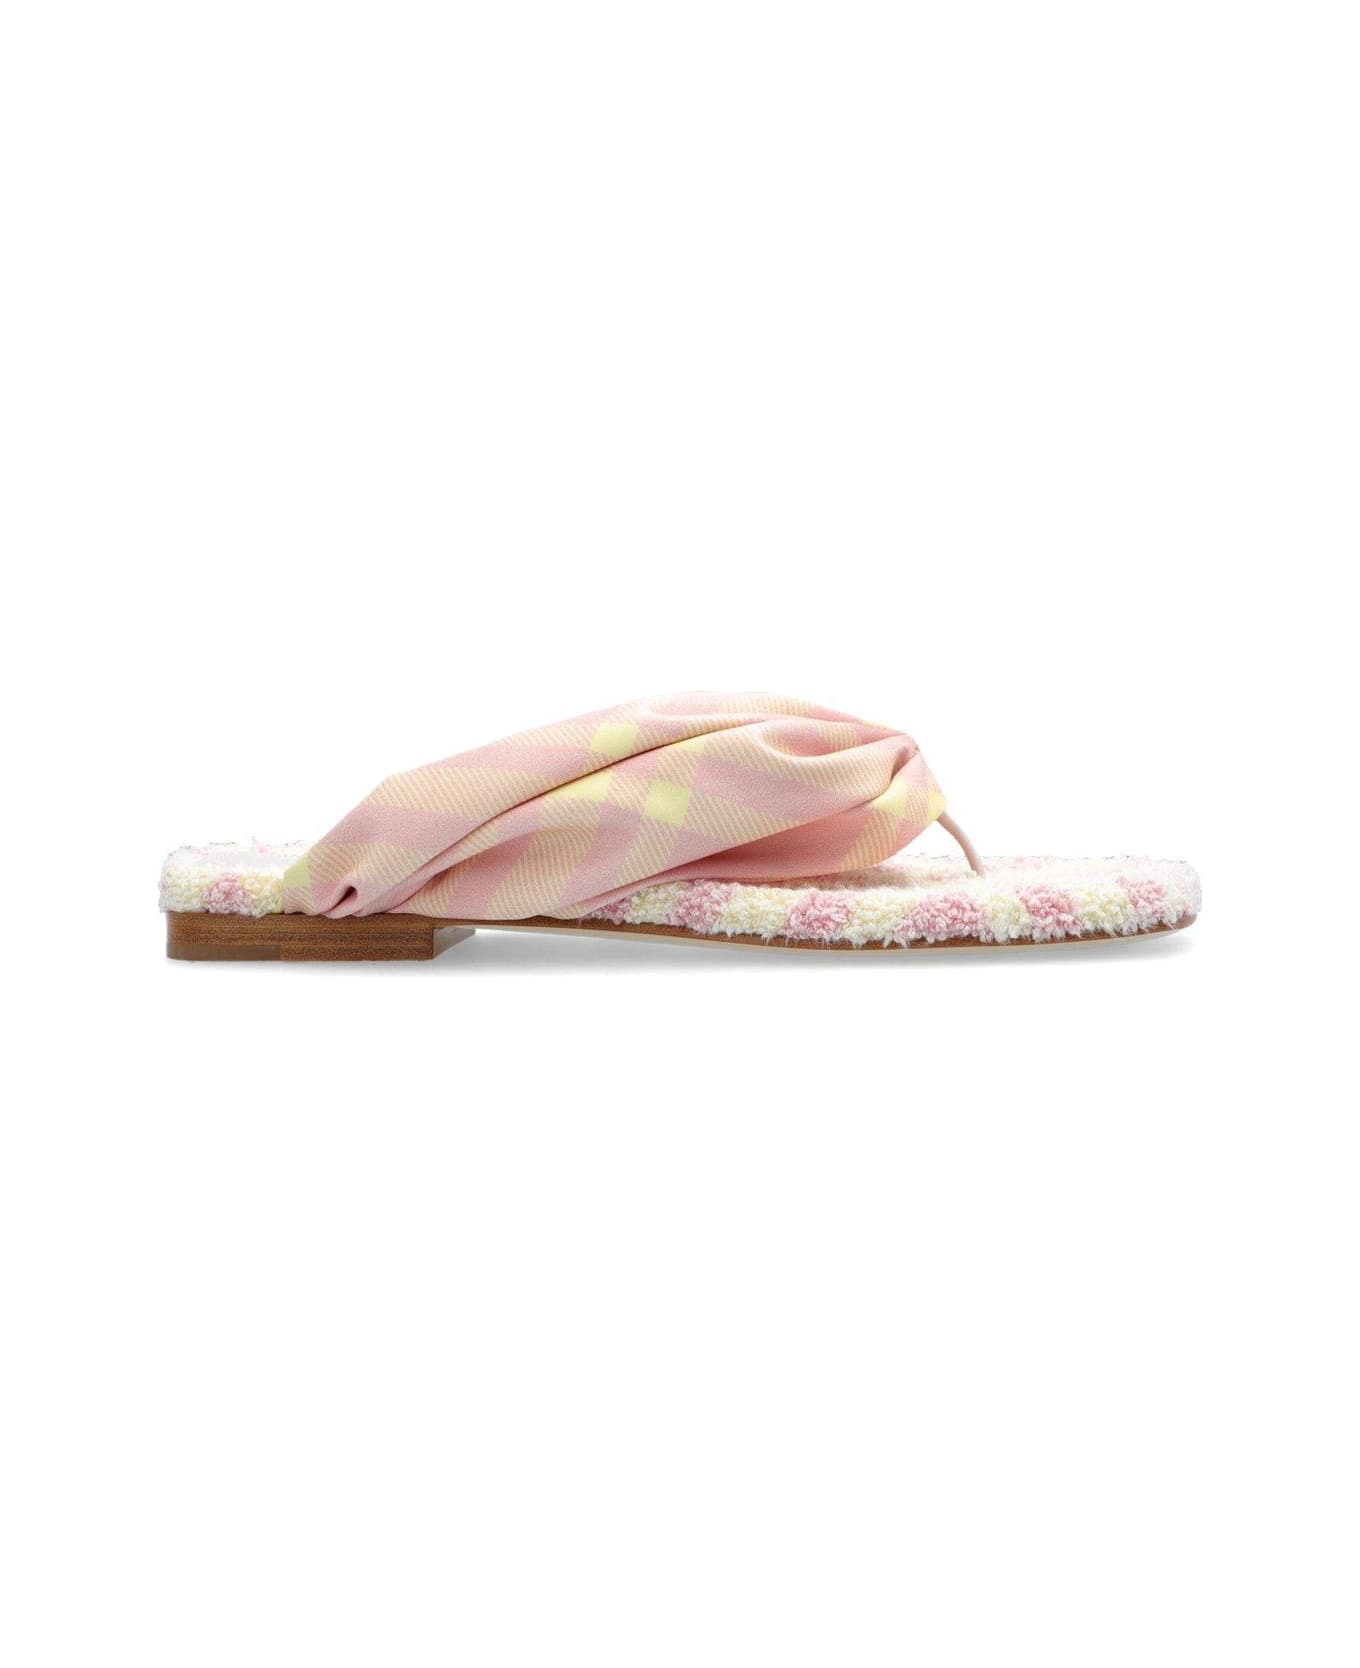 Burberry Check Printed Open-toe Flat Sandals - For the latest and best running shoes and kit